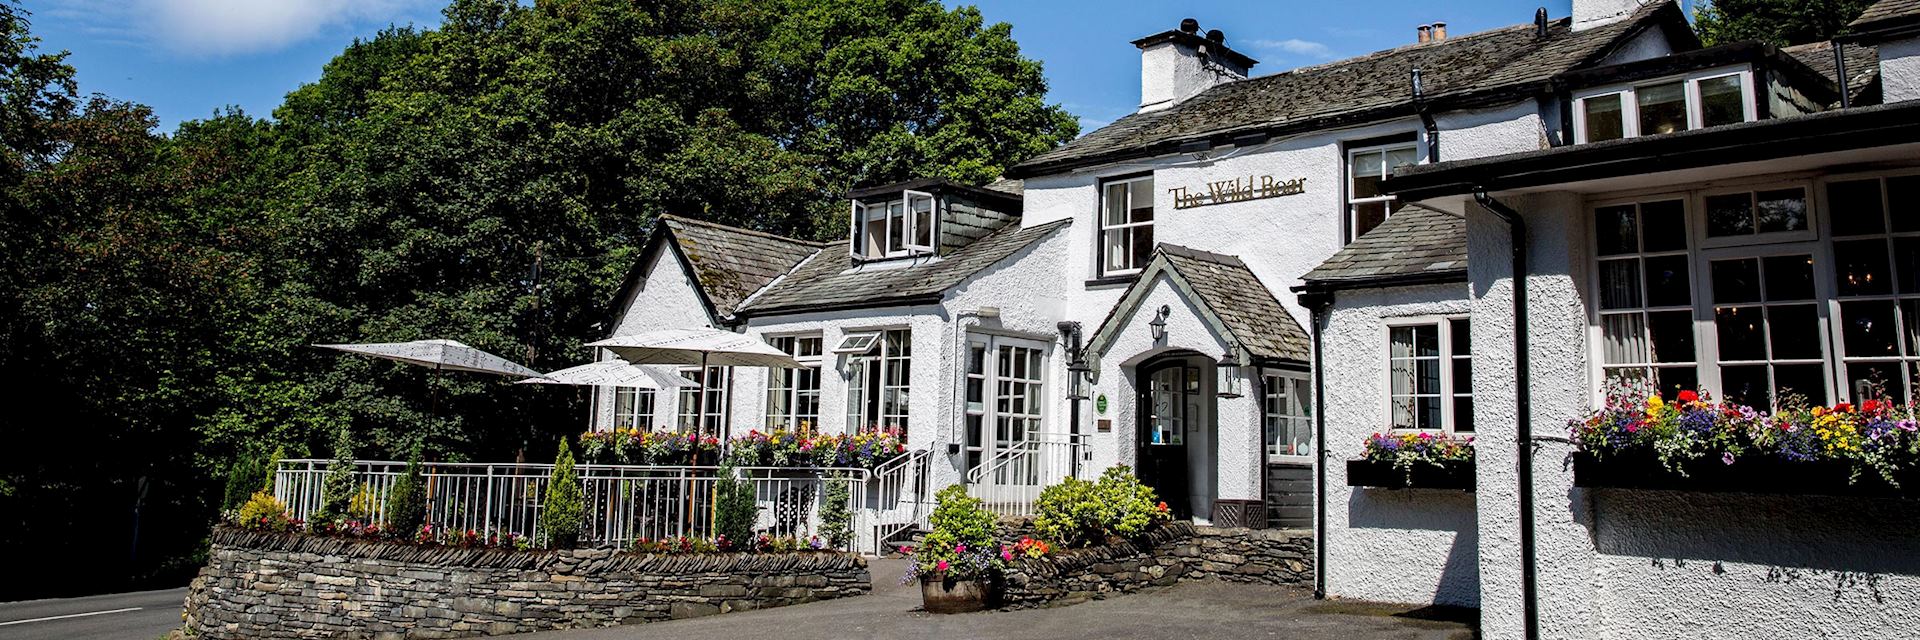 The Wild Boar, The Lake District